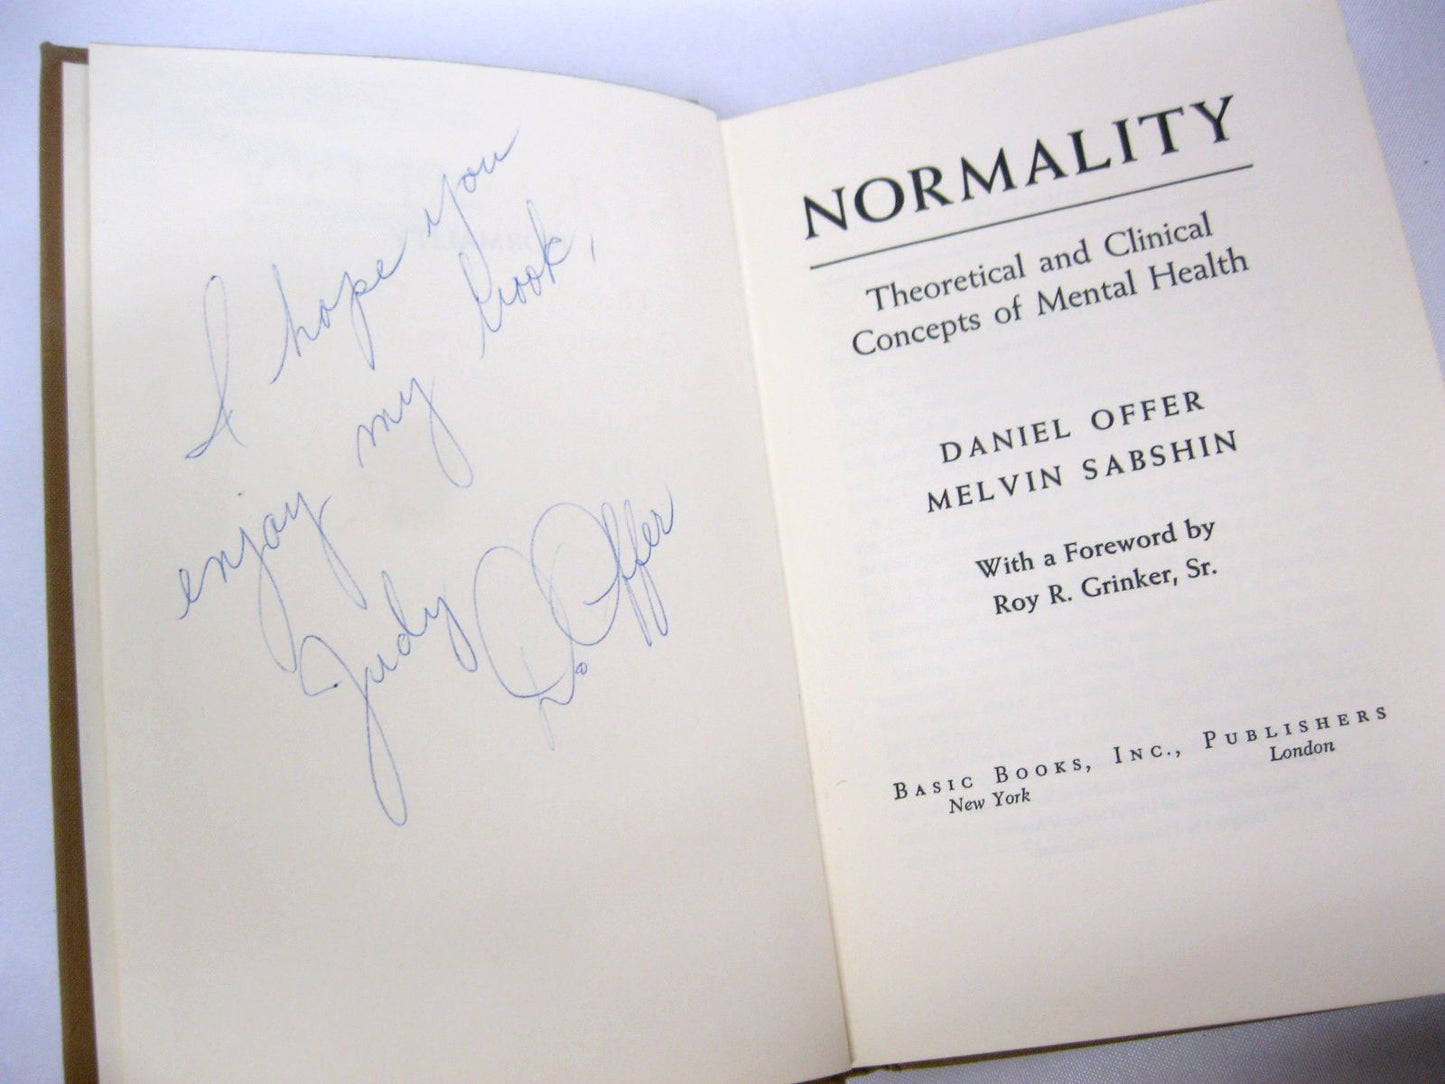 Normality: Theoretical and Clinical Concepts of Mental Health by Daniel Offer and Melvin Sabshir